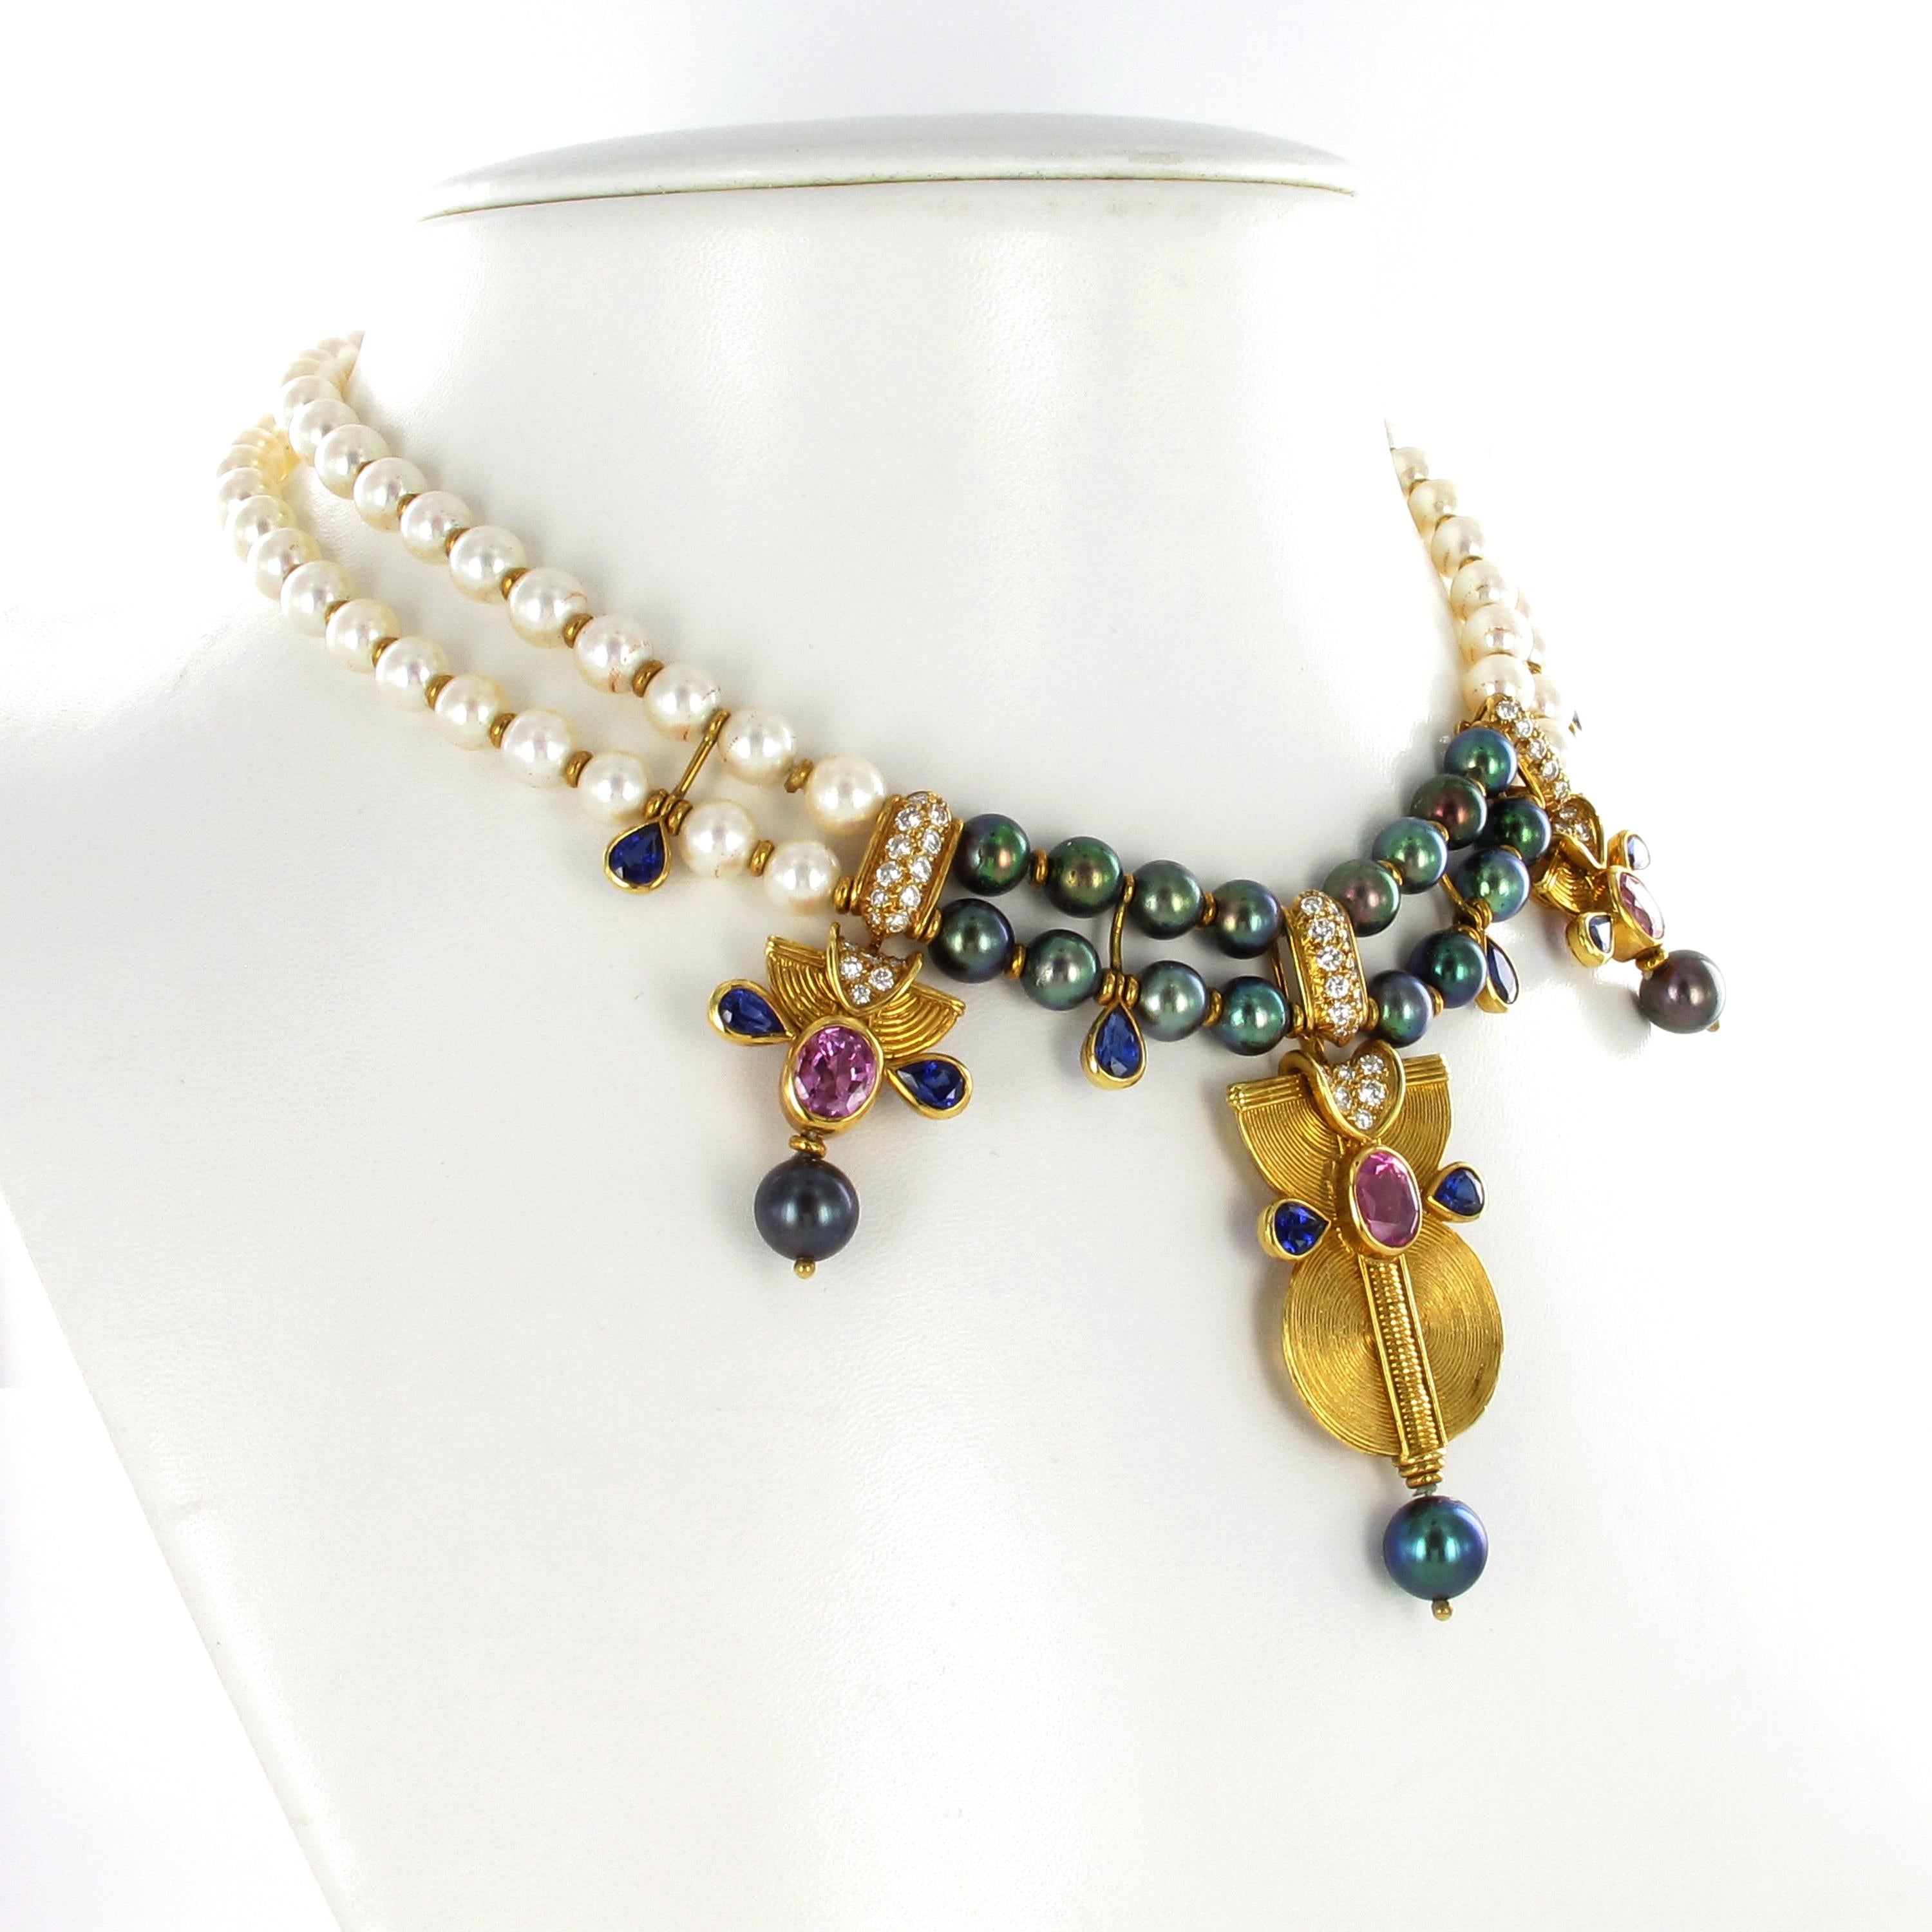 This extraordinary necklace by french jeweller Boucheron shows a stunning combination of colours and precious stones. 19 dark green and highly lustrous Tahitian cultured pearls are combined with 78 white and perfectly round Akoya cultured pearls